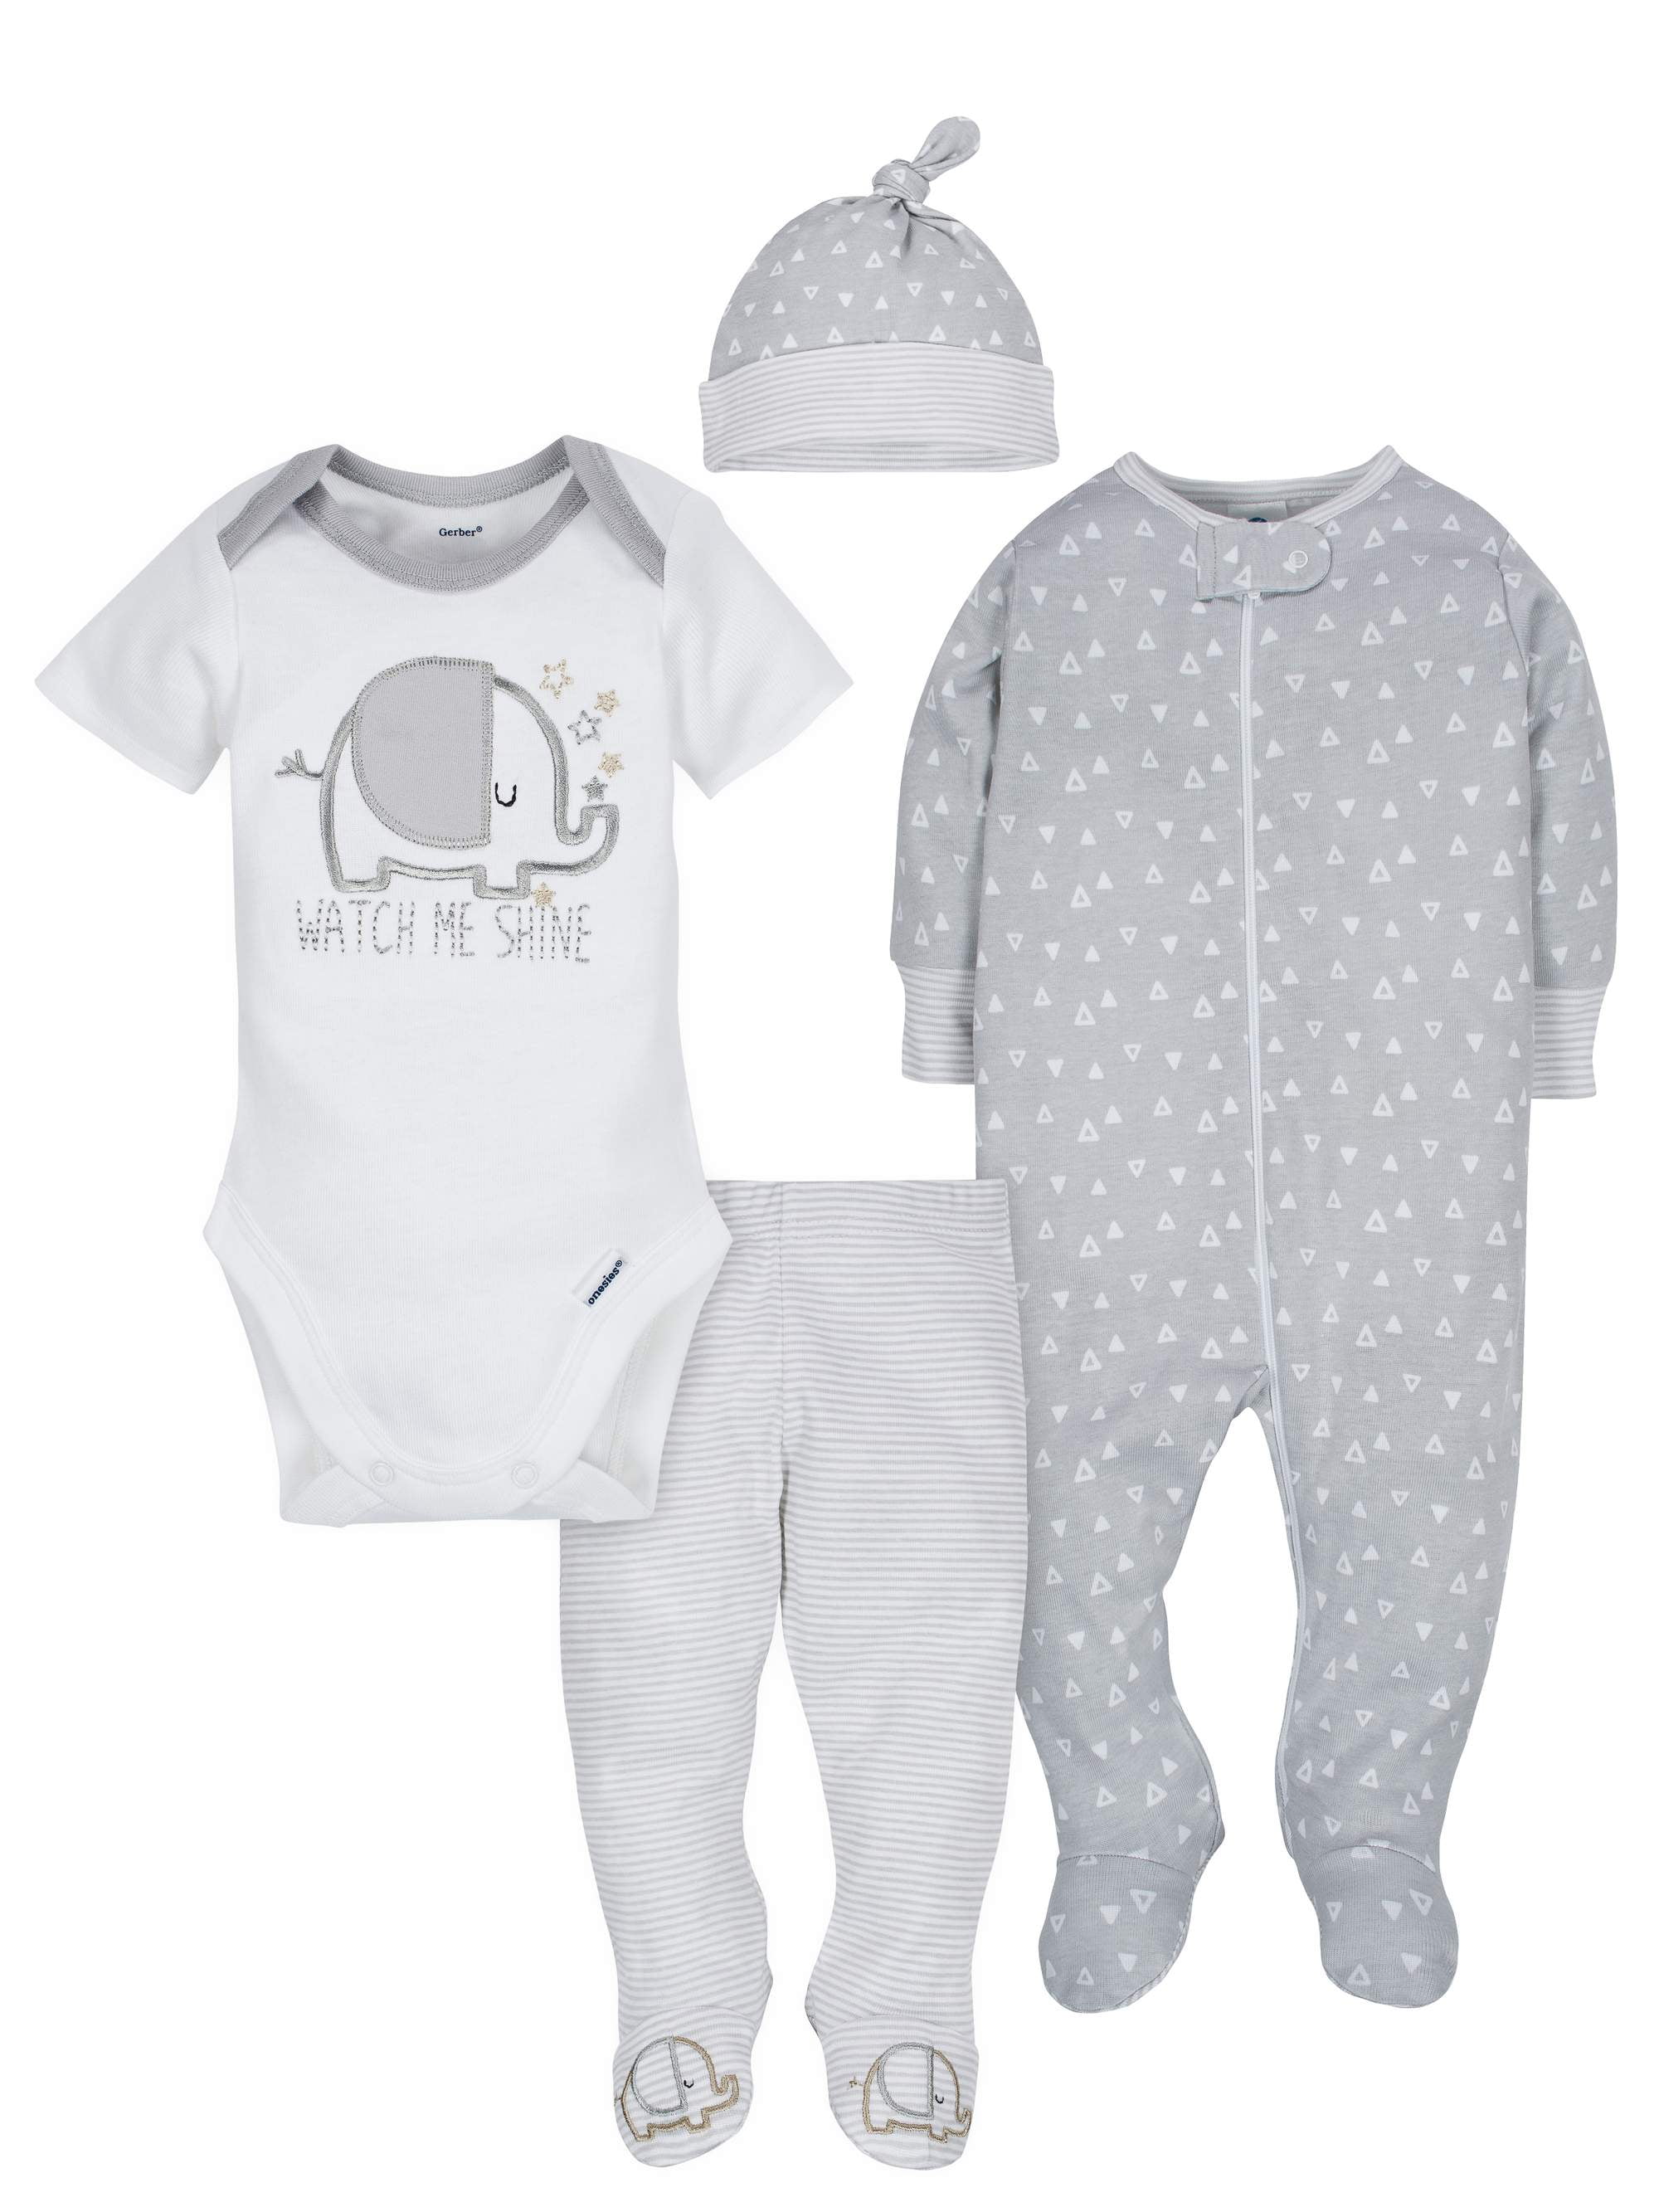 Gerber Baby Boy or Girl Gender Neutral Outfit Take Me Home Outfit ...